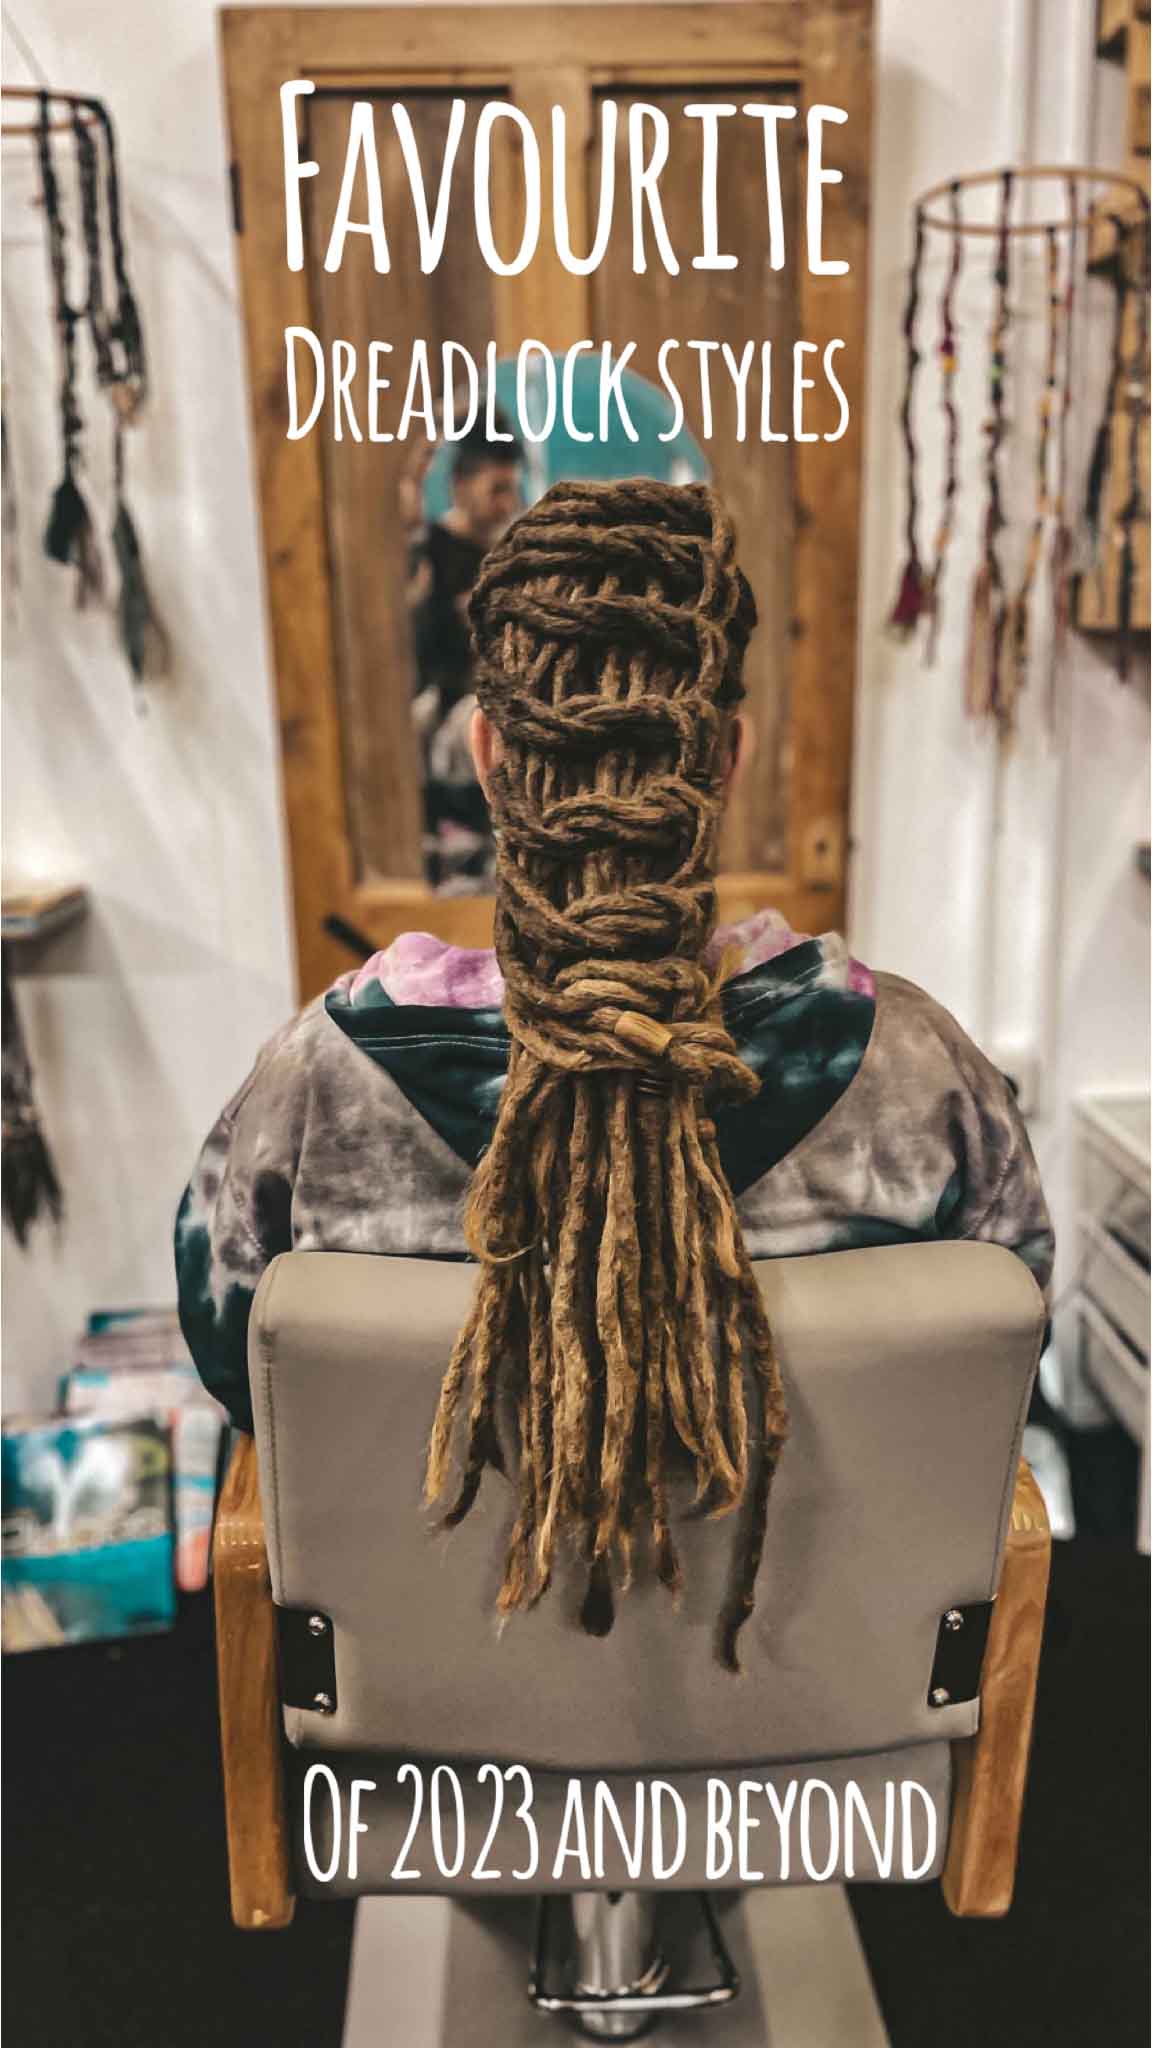 dreadhead sitting on a salon chair with dreadlock style with knots by crafterelena text overlay Favourite dreadlock styles of 2023 and beyond